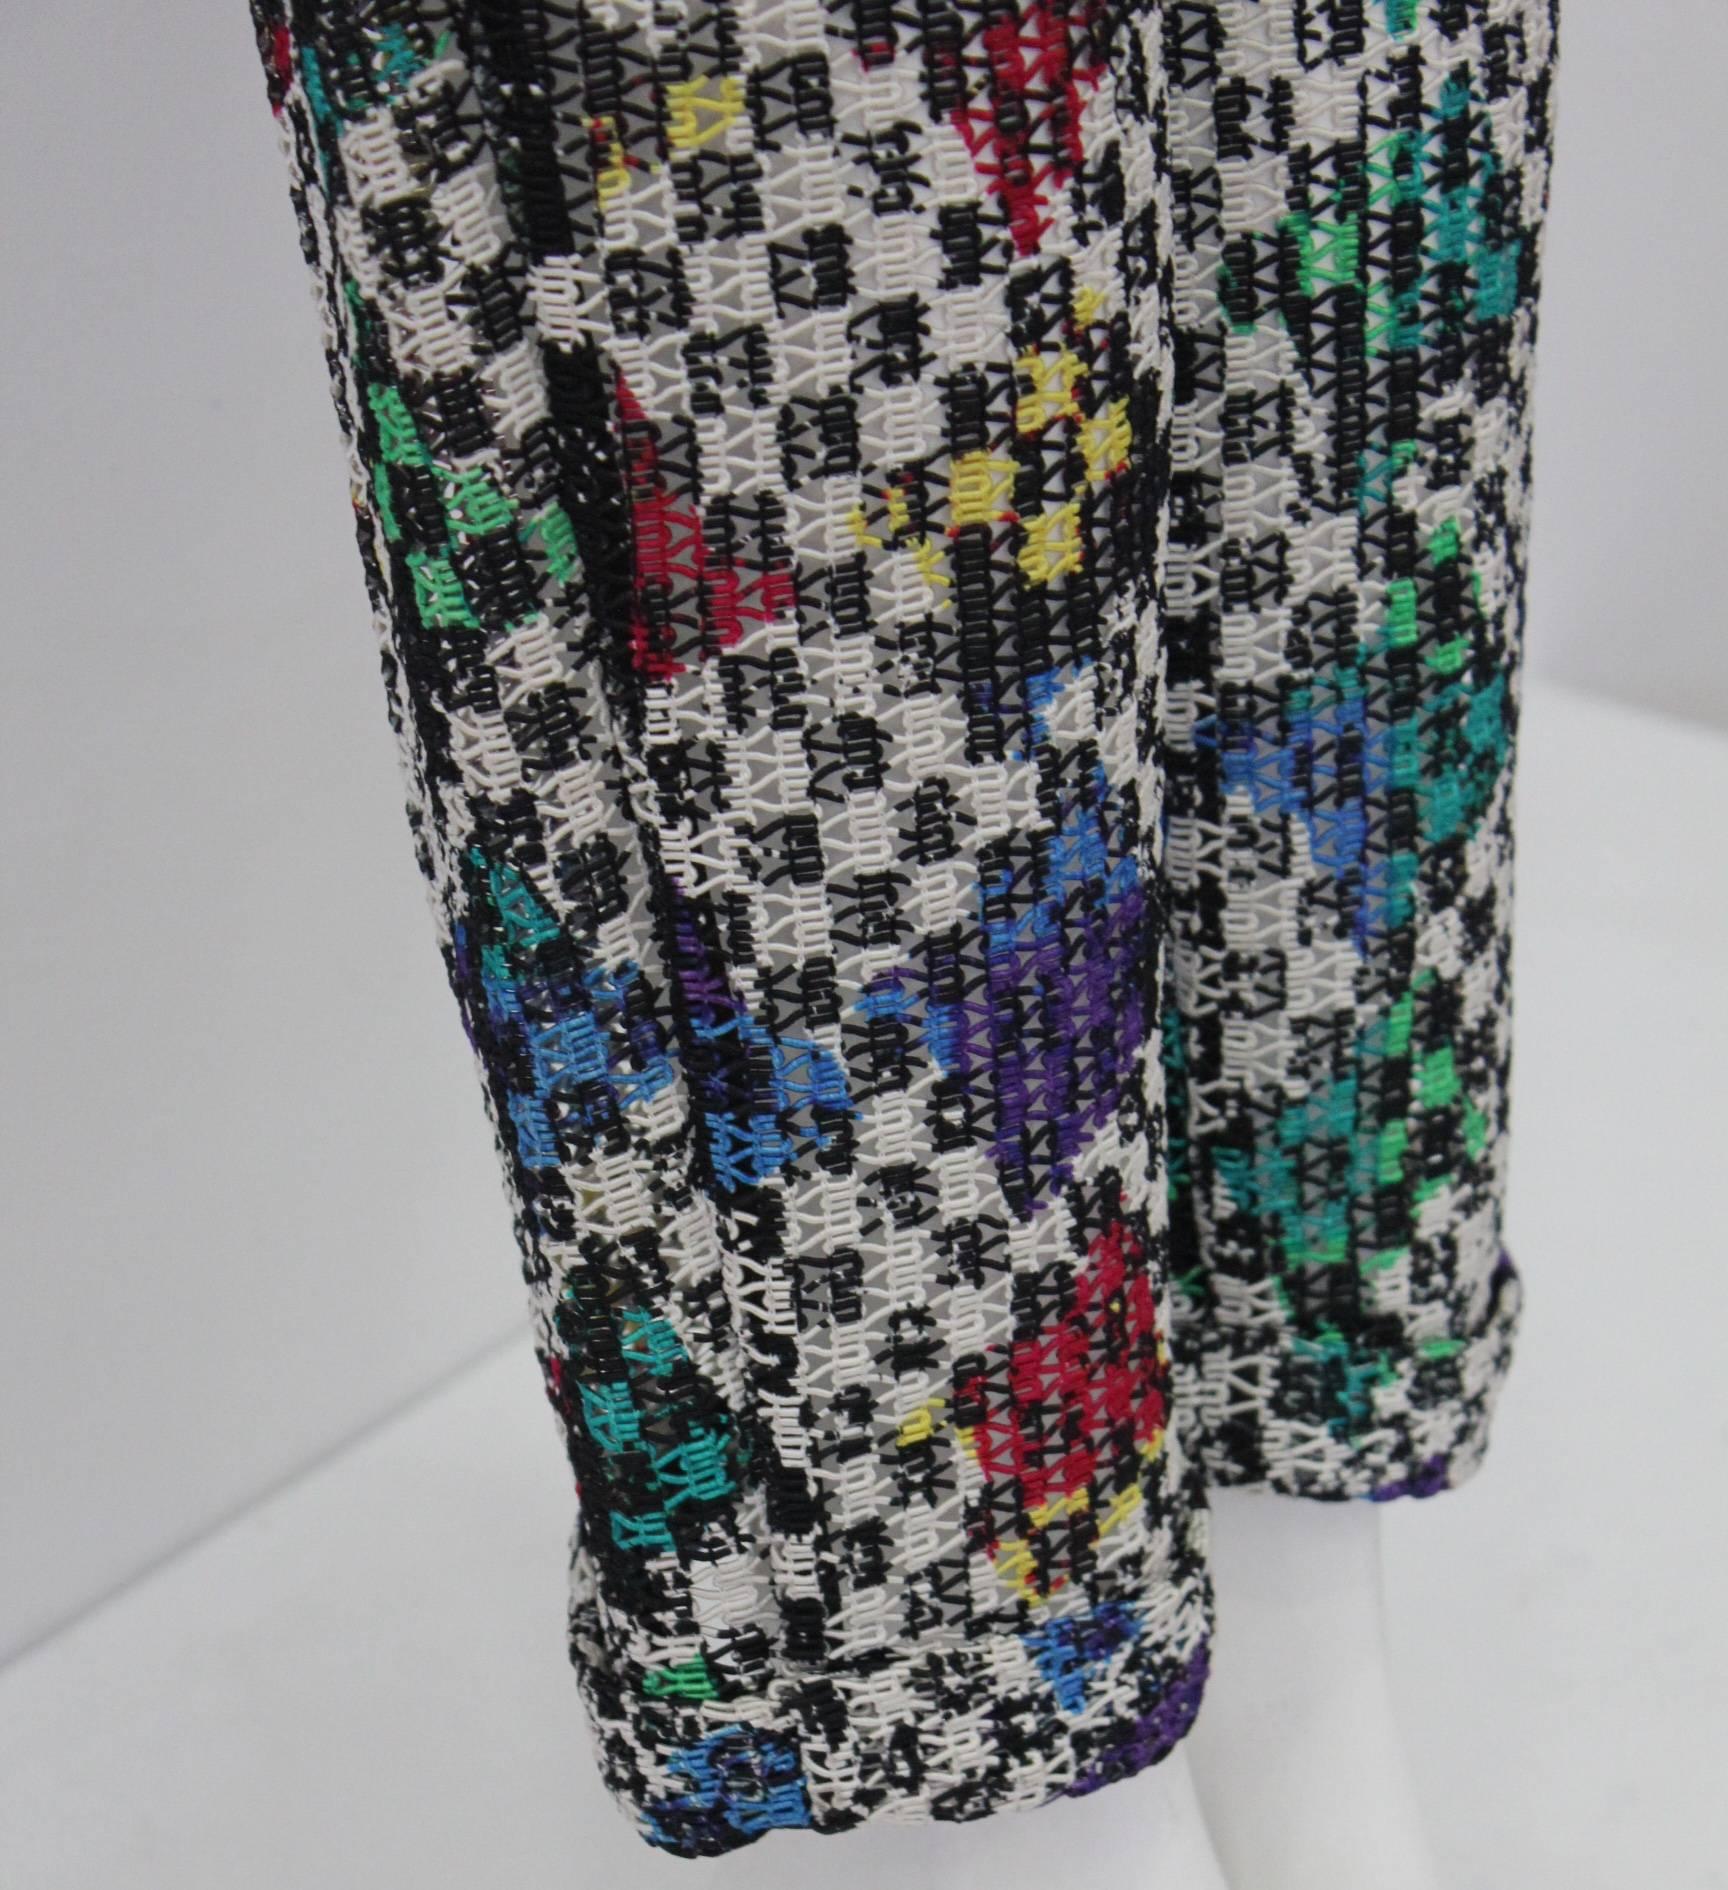 Women's One Of A Kind Gianni Versace Couture Punk Multi-Coloured Pants Fall 1993 For Sale